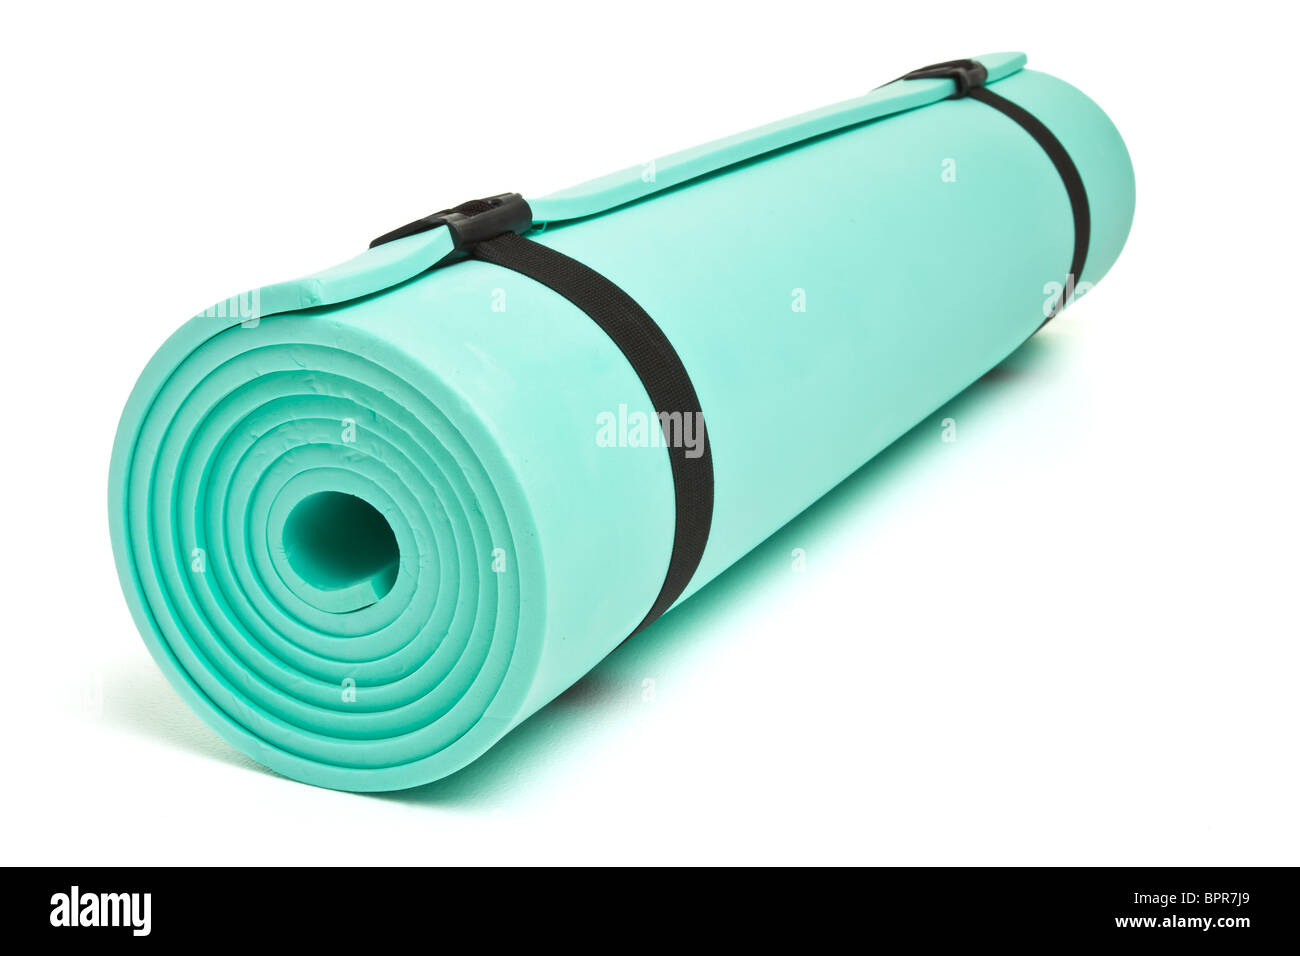 Lightweight foam Camping Bed roll or Yoga mat isolated on white. Stock Photo